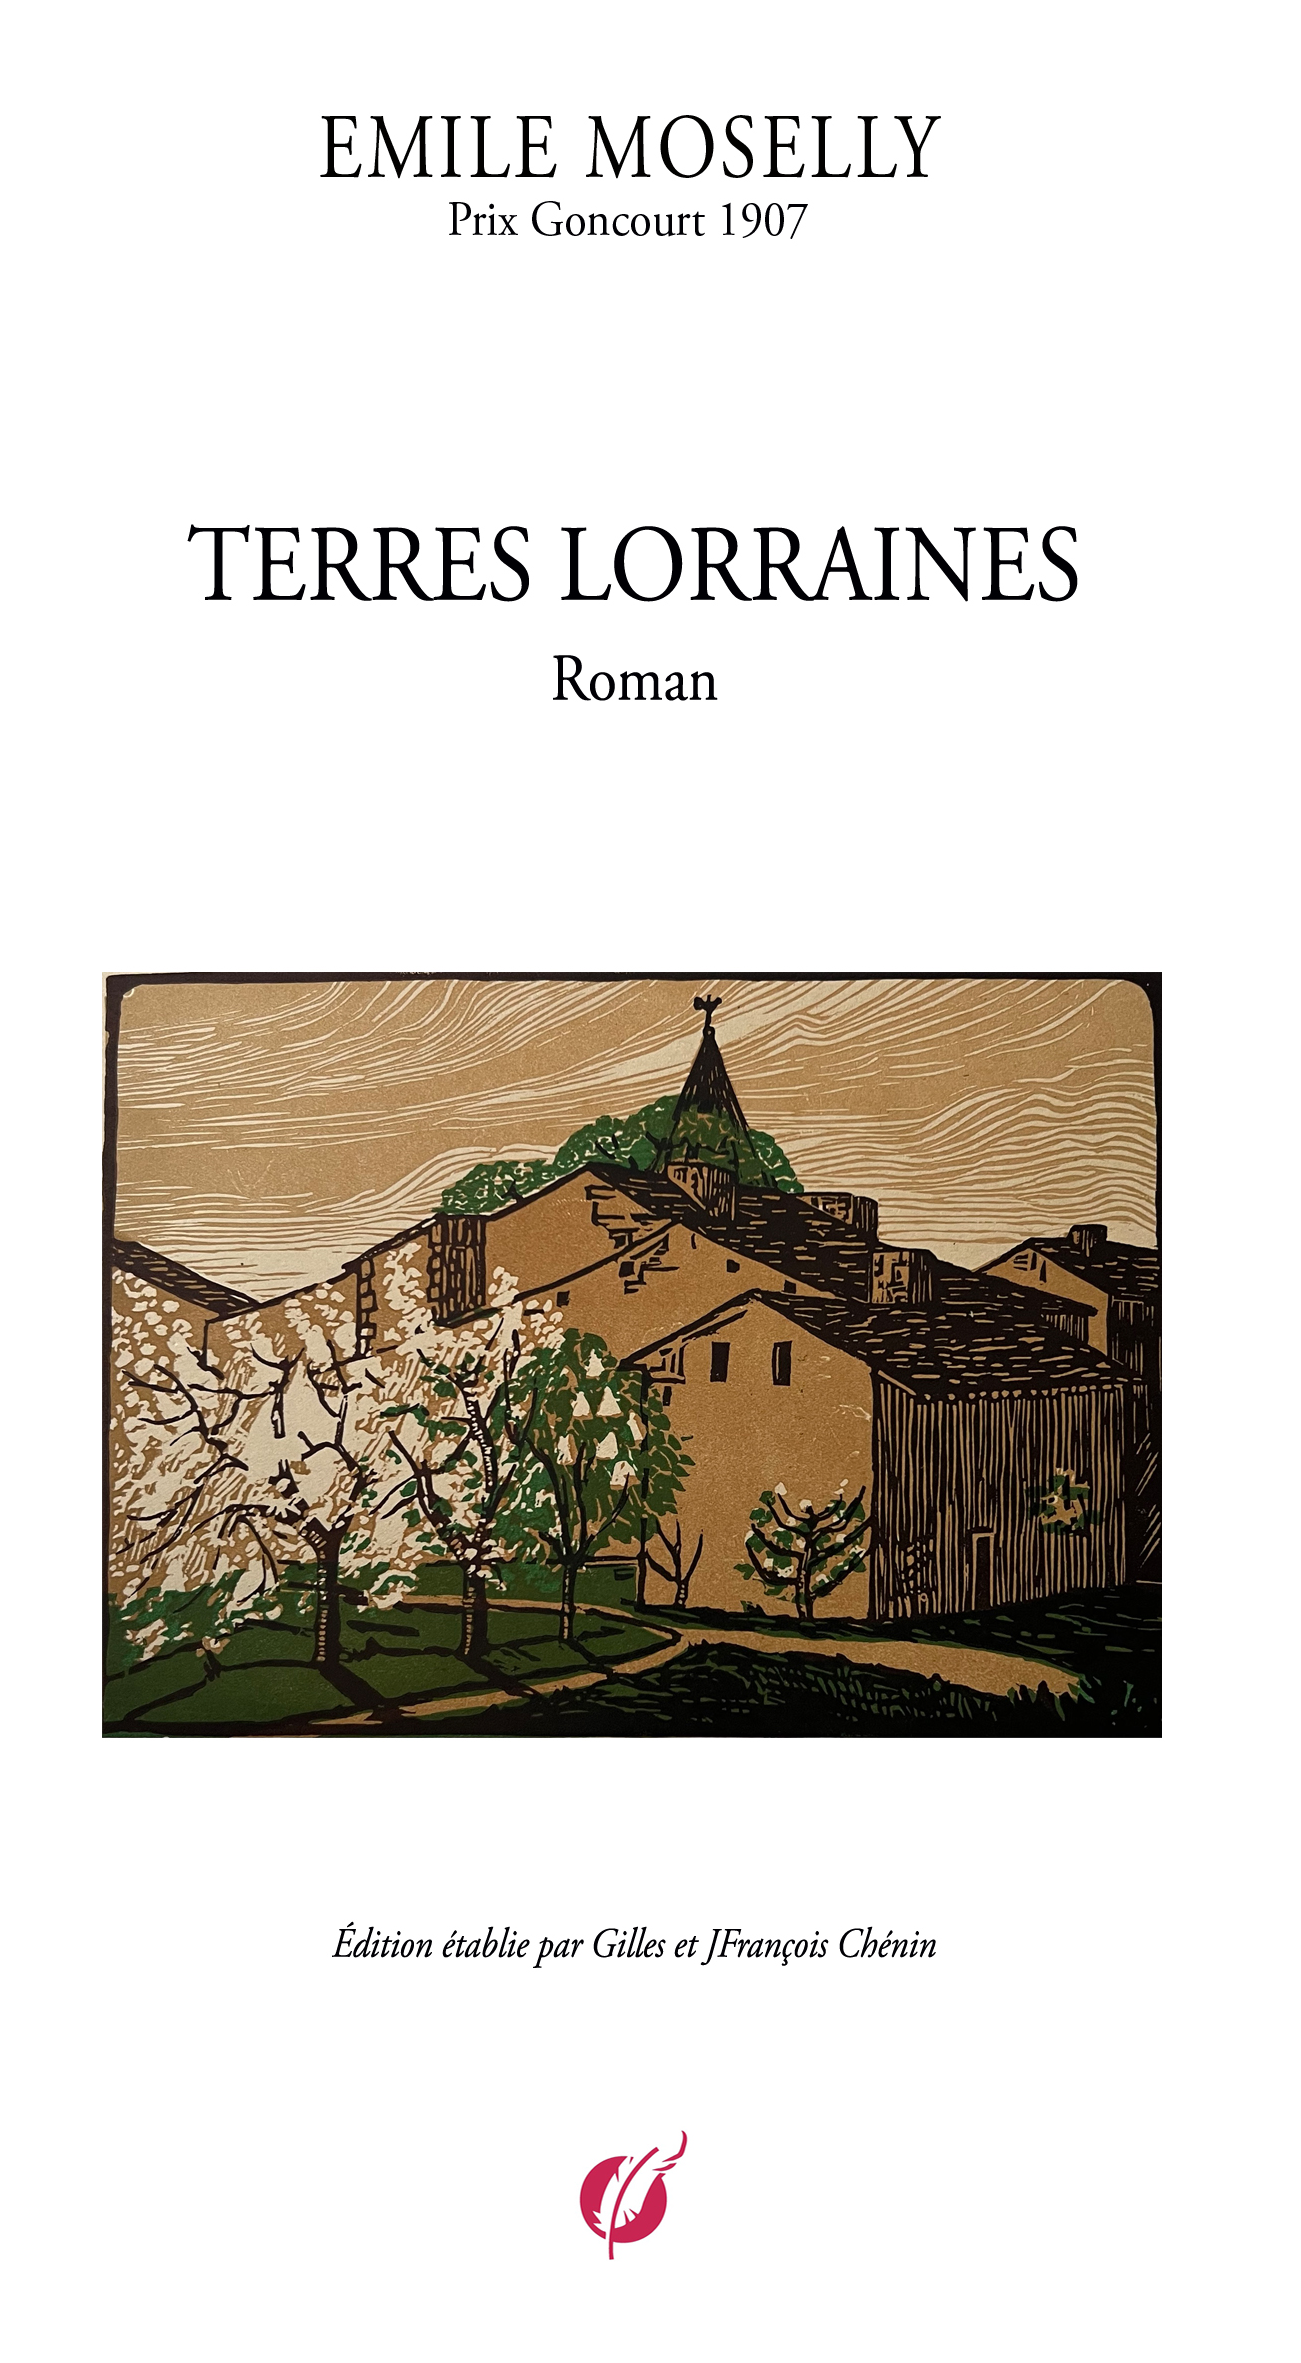 EMILE MOSELLY - TERRES LORRAINES